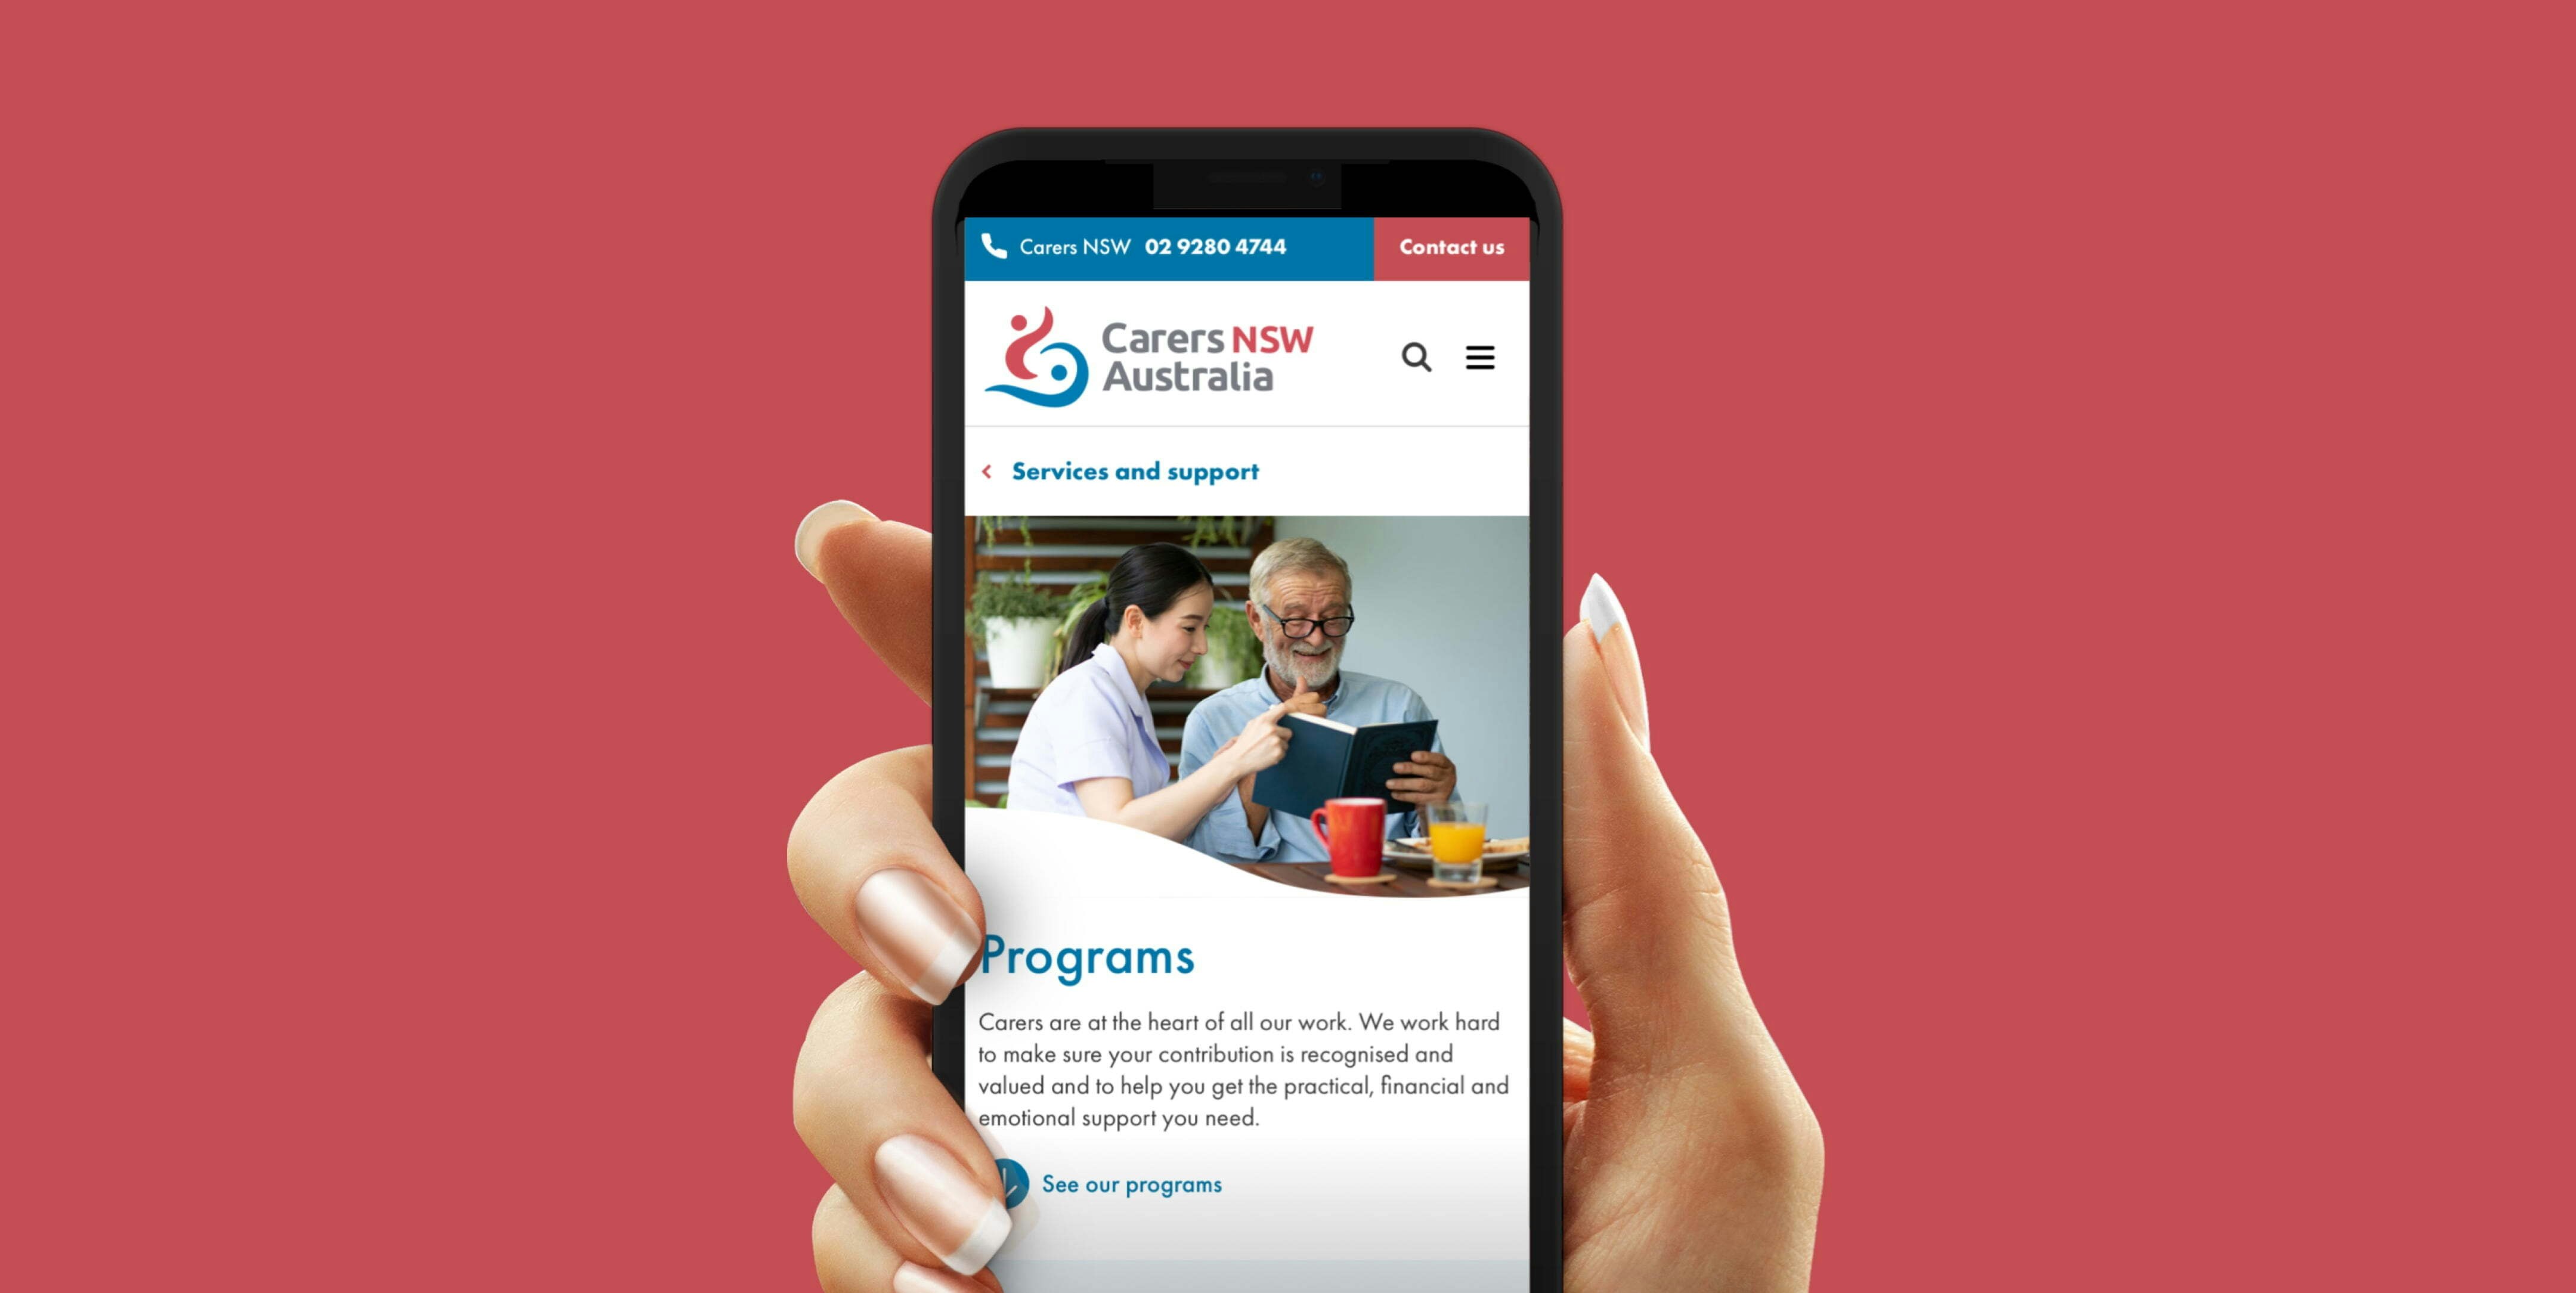 Carers new south wales  mobile view